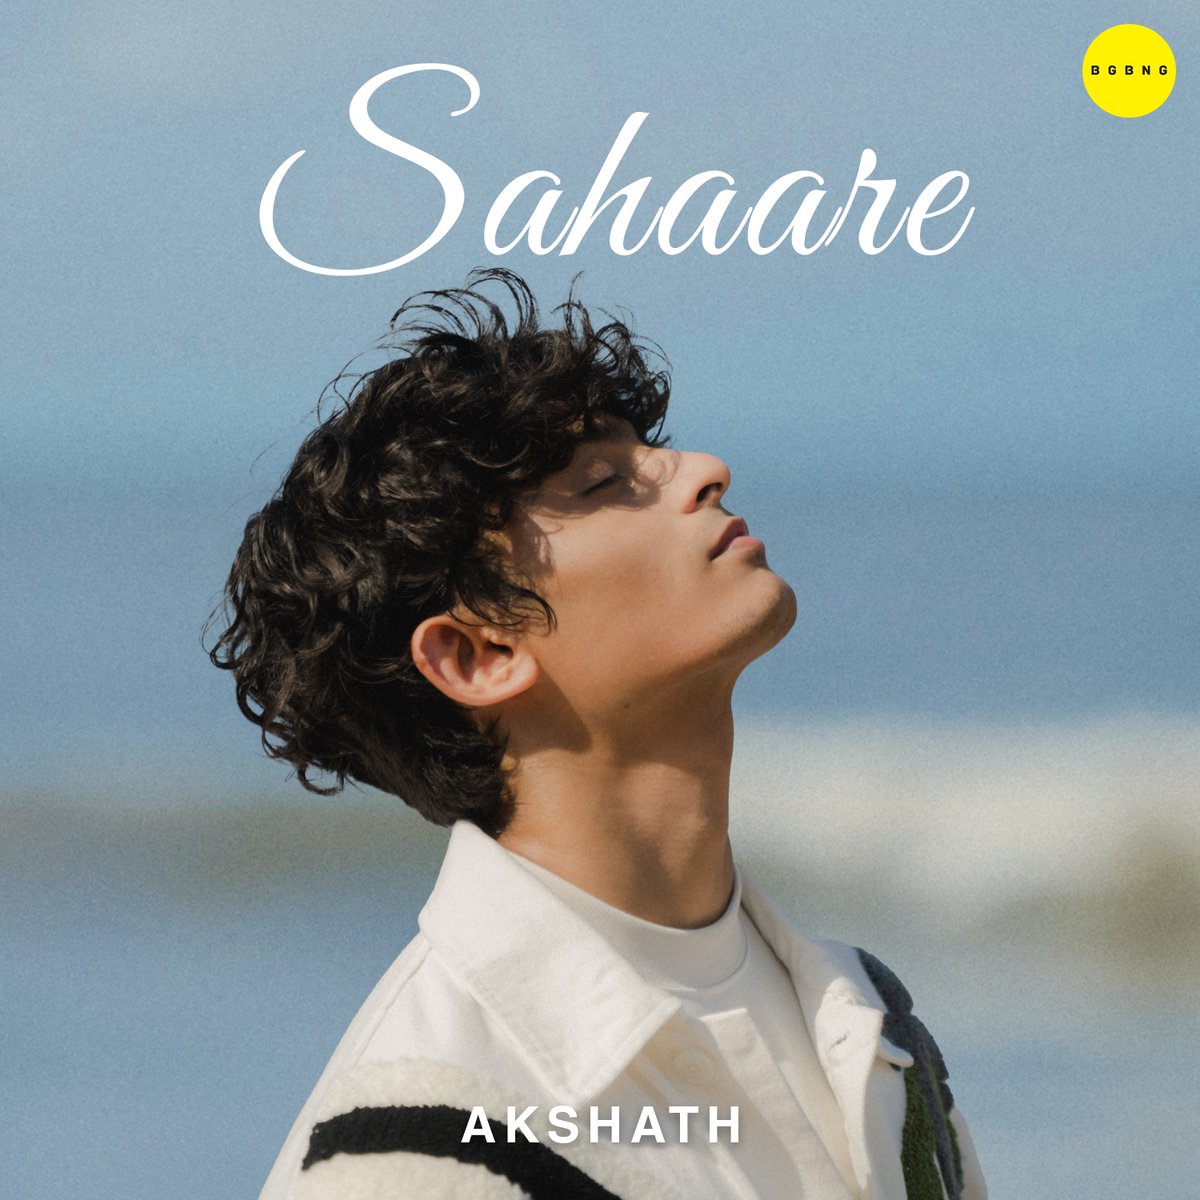 If you’re in love or have ever loved, this one’s gonna hit you hard. Akshath's most heartfelt song, #Sahaare is going to be yours soon💙 Releasing on 18th May! #StayTuned #Akshath #AkshathAcharya #IndieMusic #HindiIndie #BGBNG